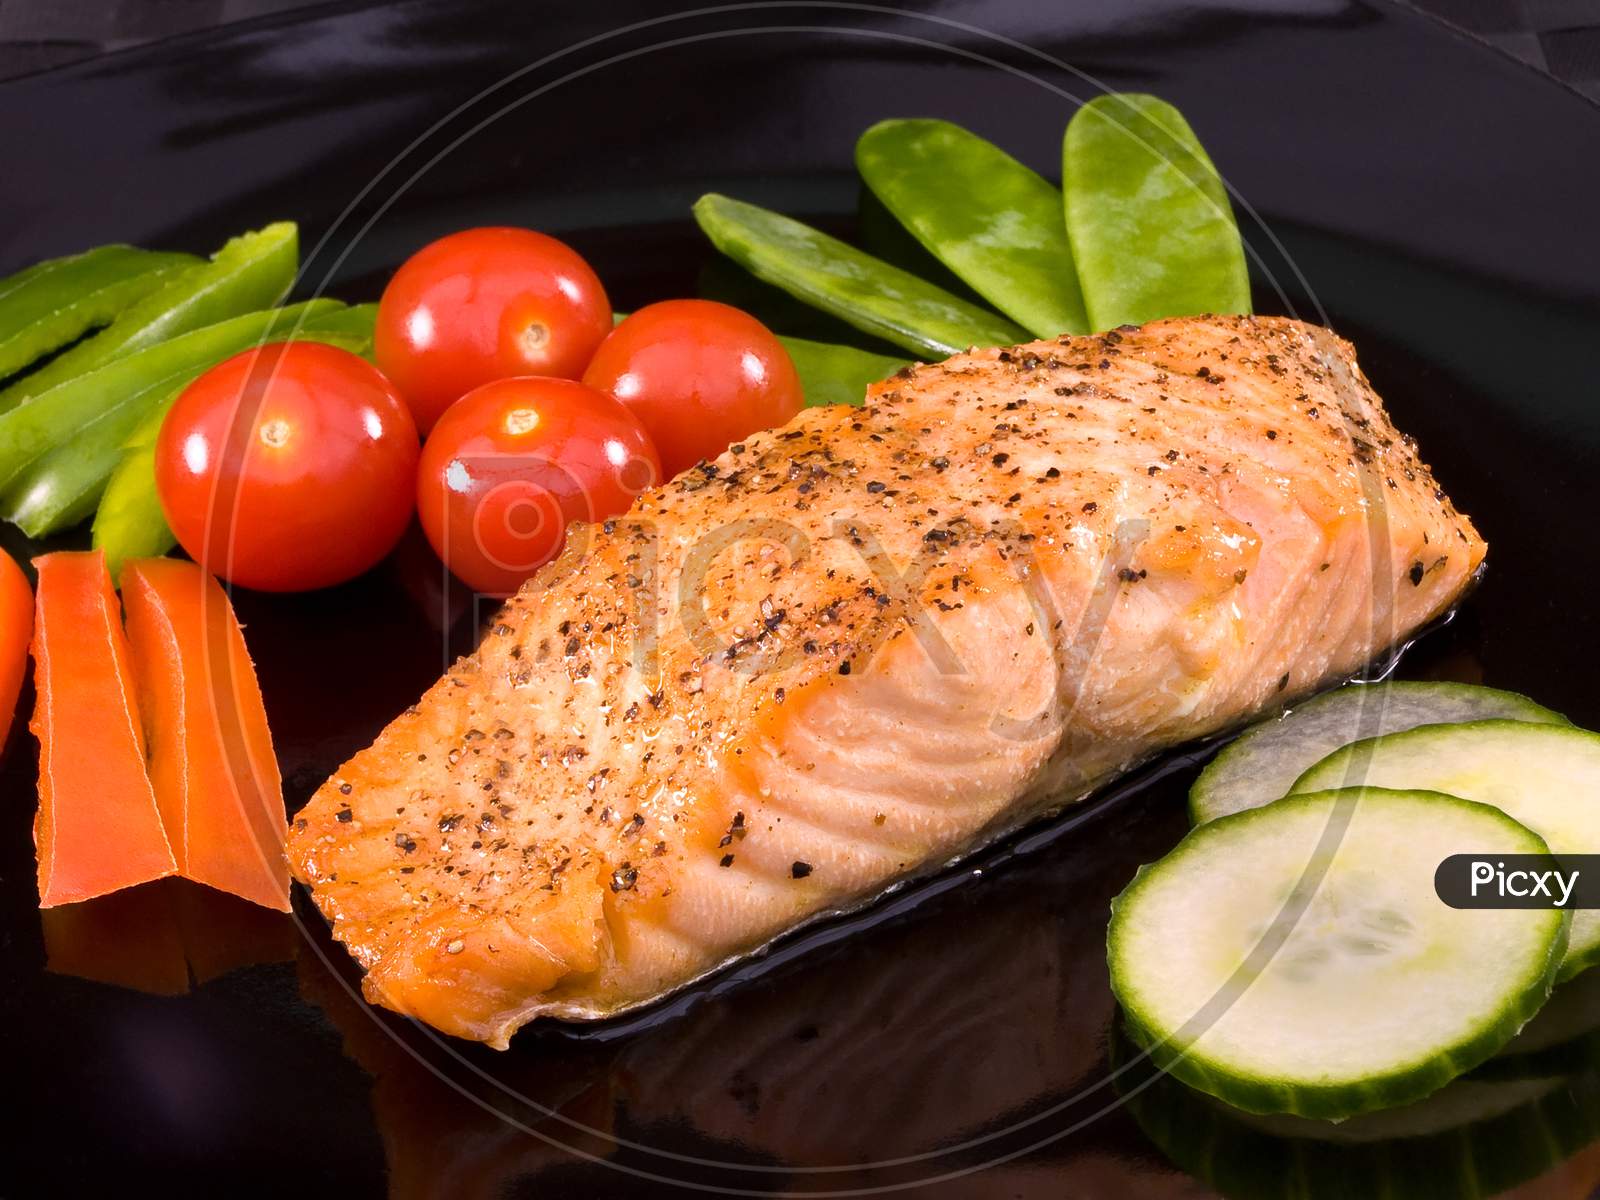 Grilled salmon on a plate with salad ready for serving.